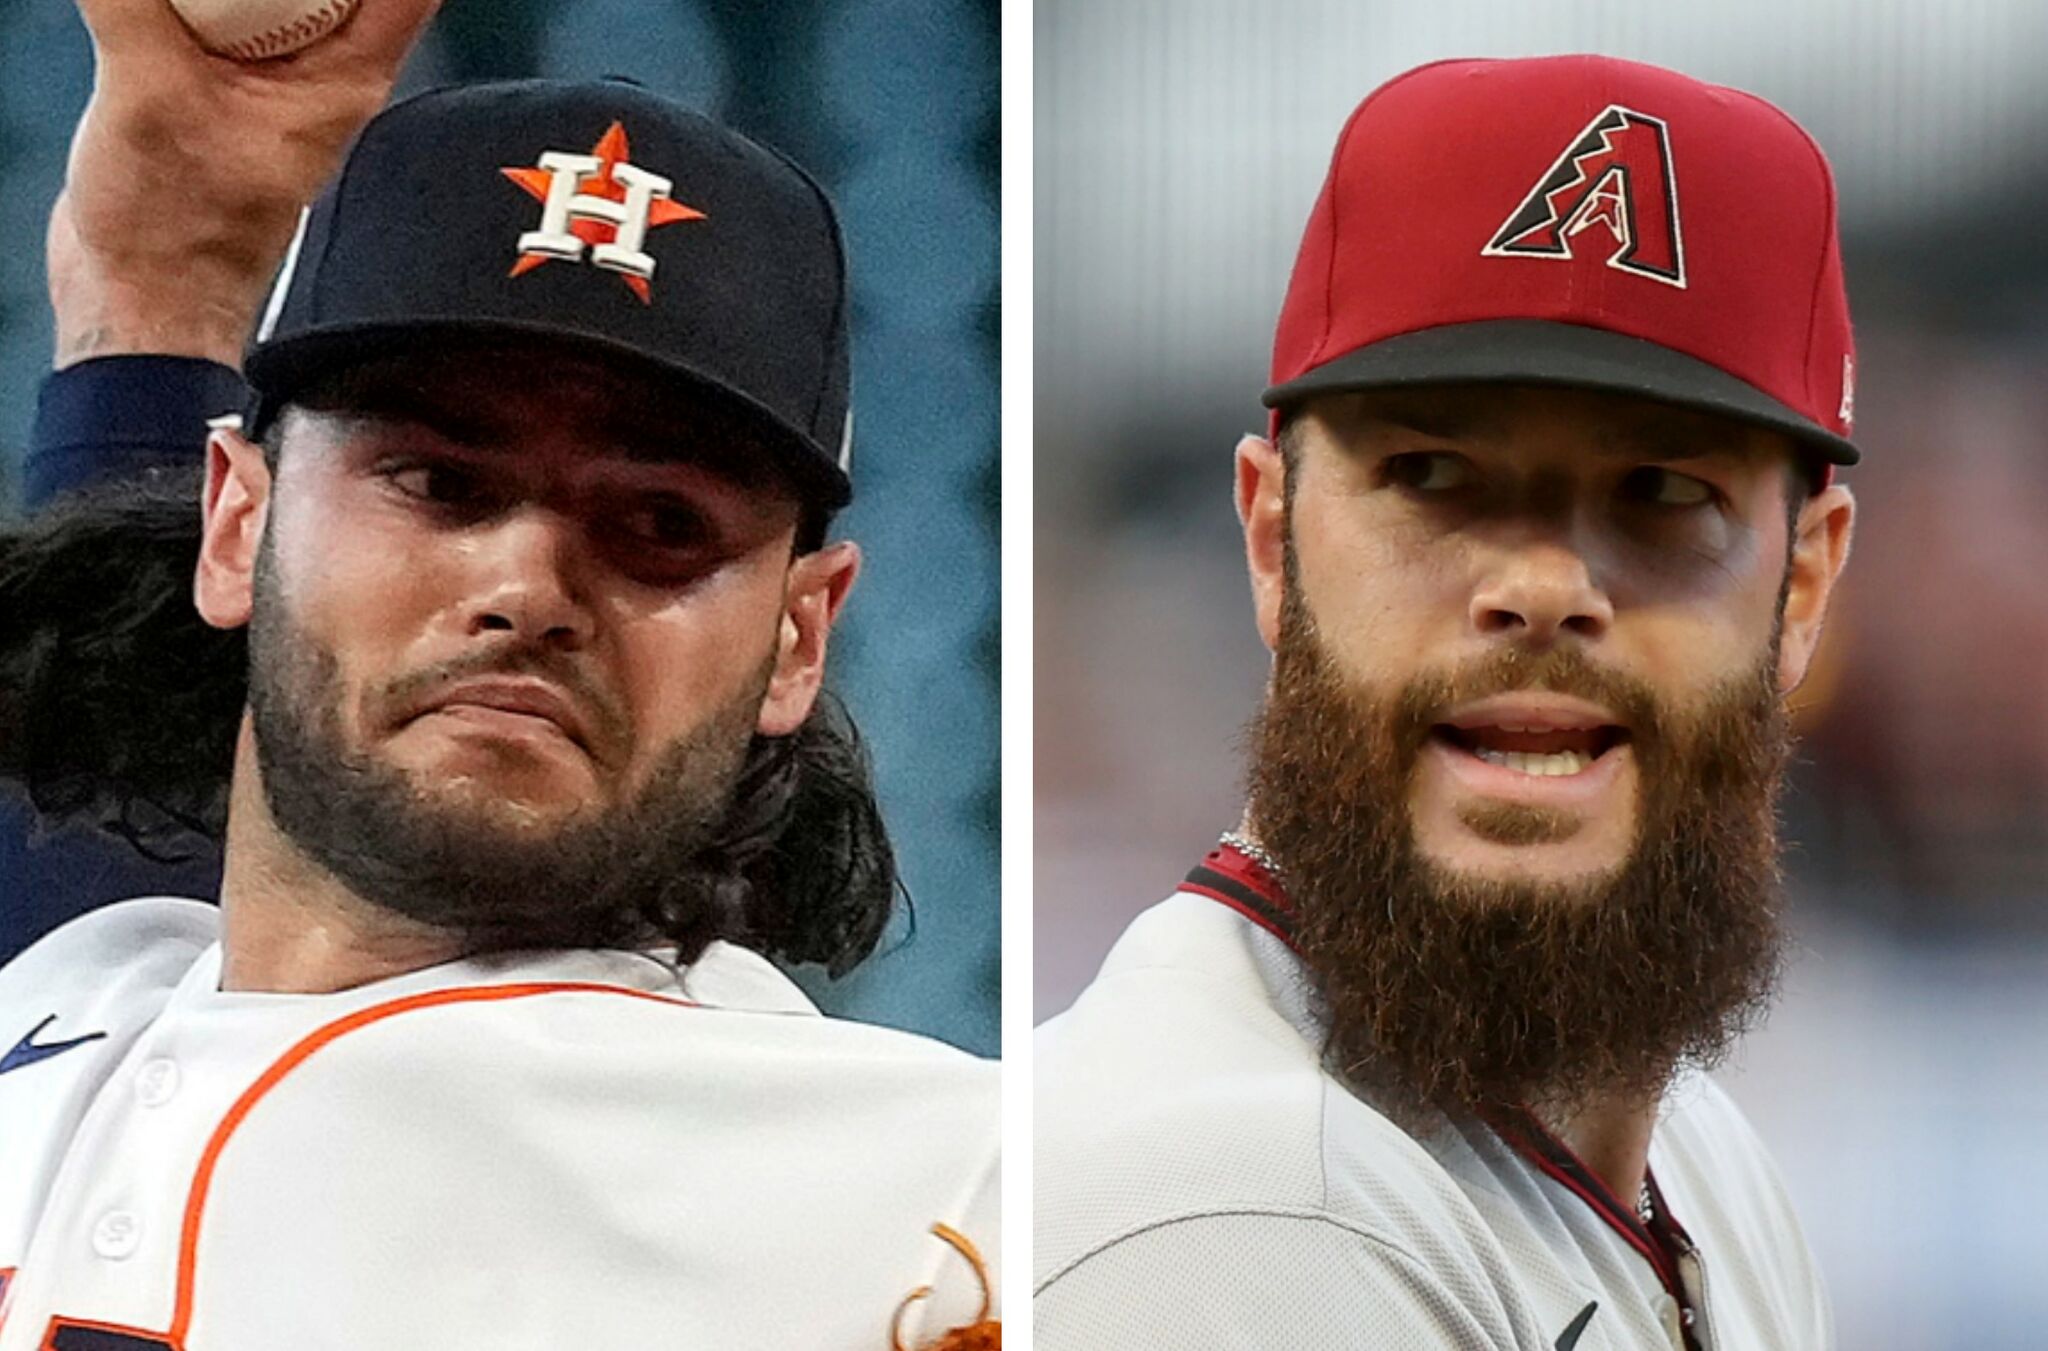 Lance McCullers, Dallas Keuchel to face off in Sugar Land